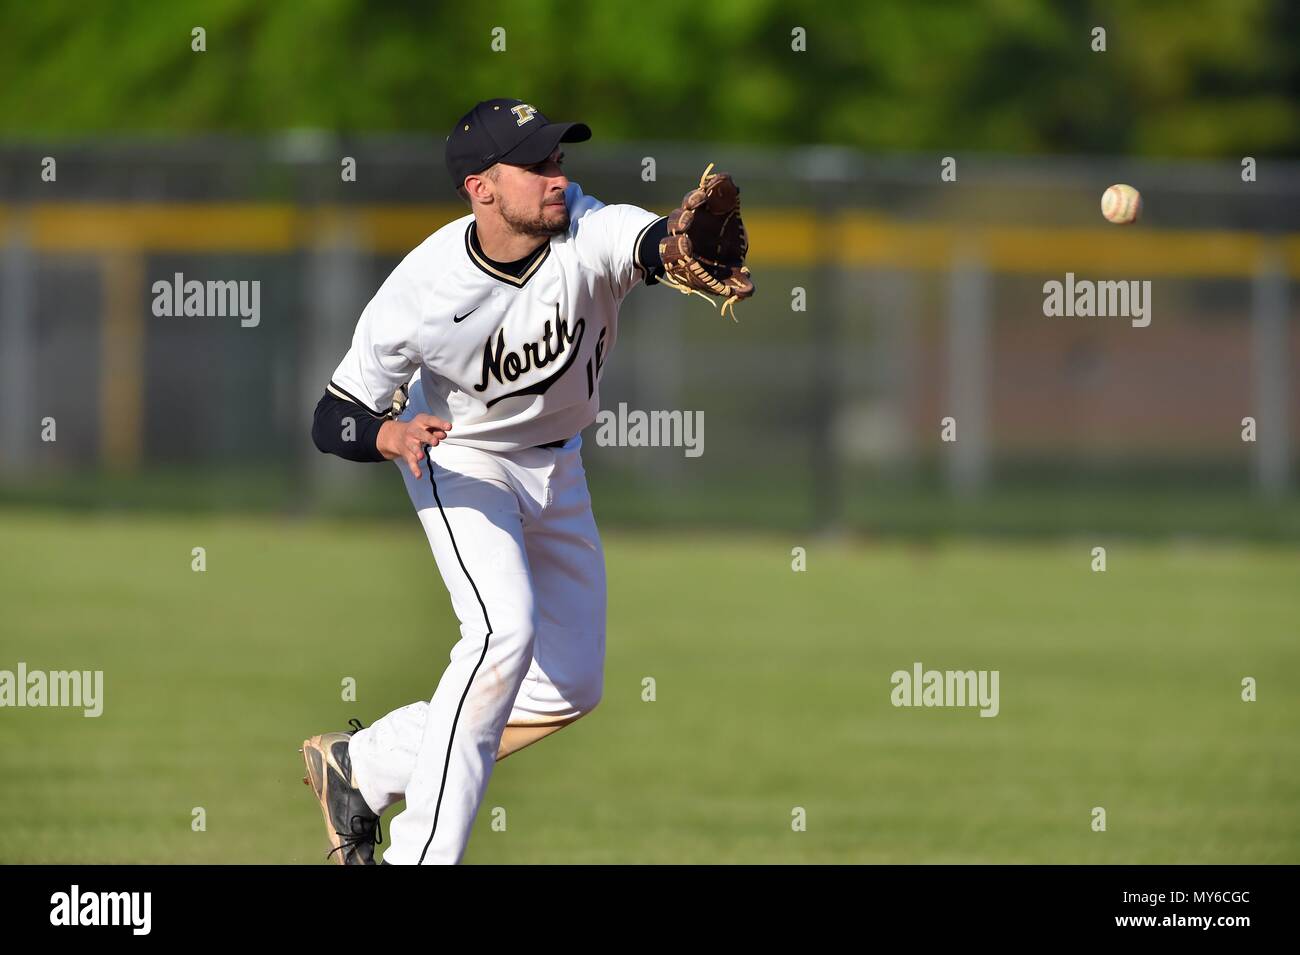 Shortstop fielding a ground ball before recording a force out at second base. USA. Stock Photo